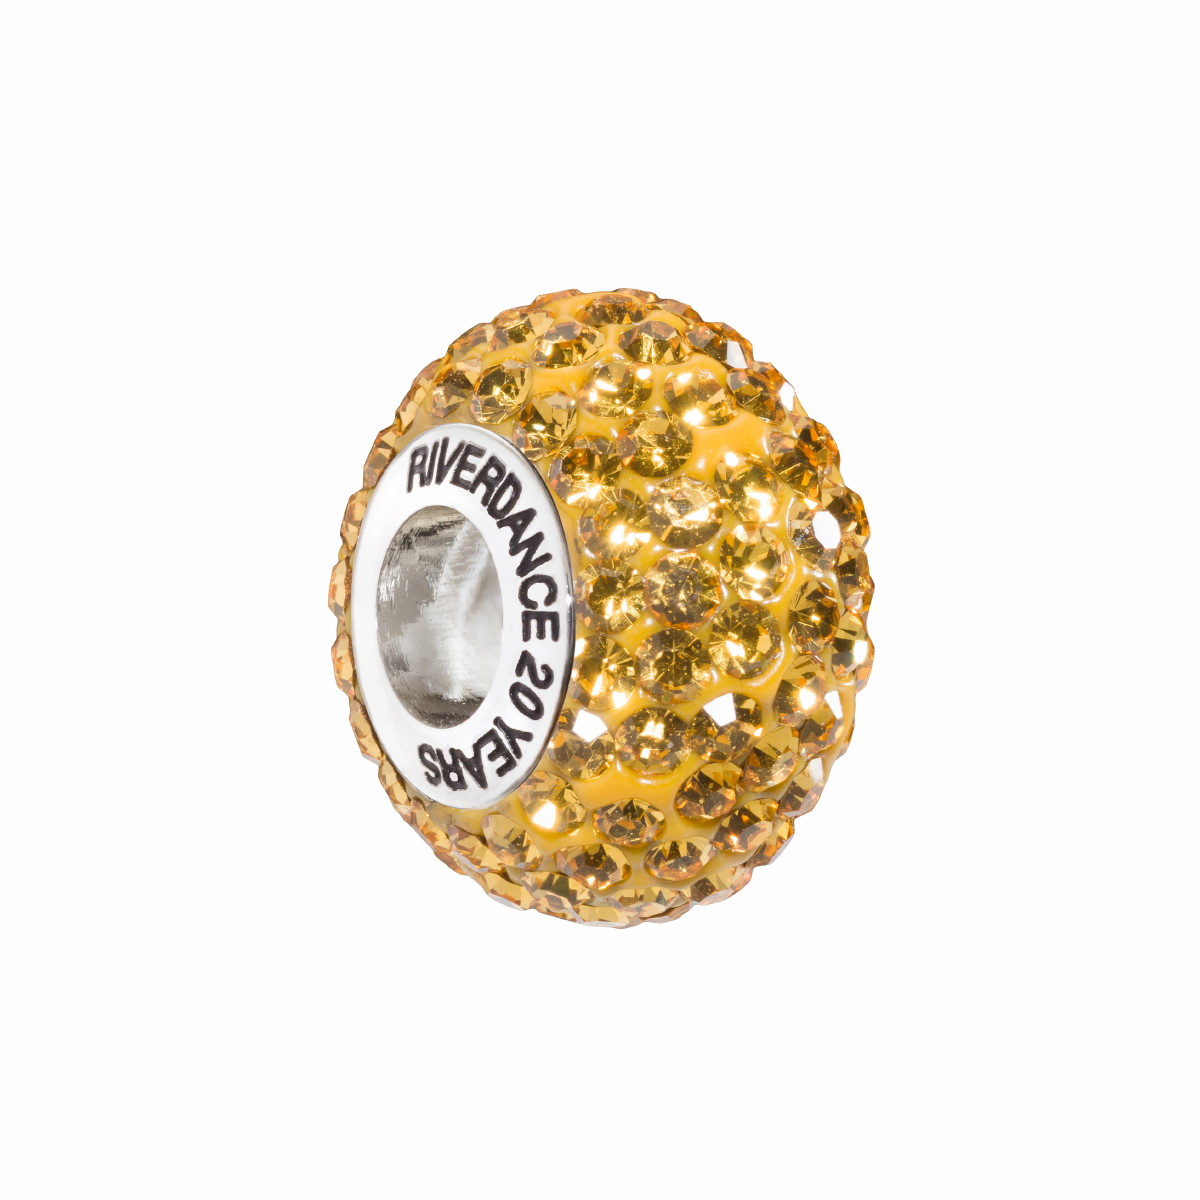 Official Riverdance20 Crystal Encrusted Bead - Yellow